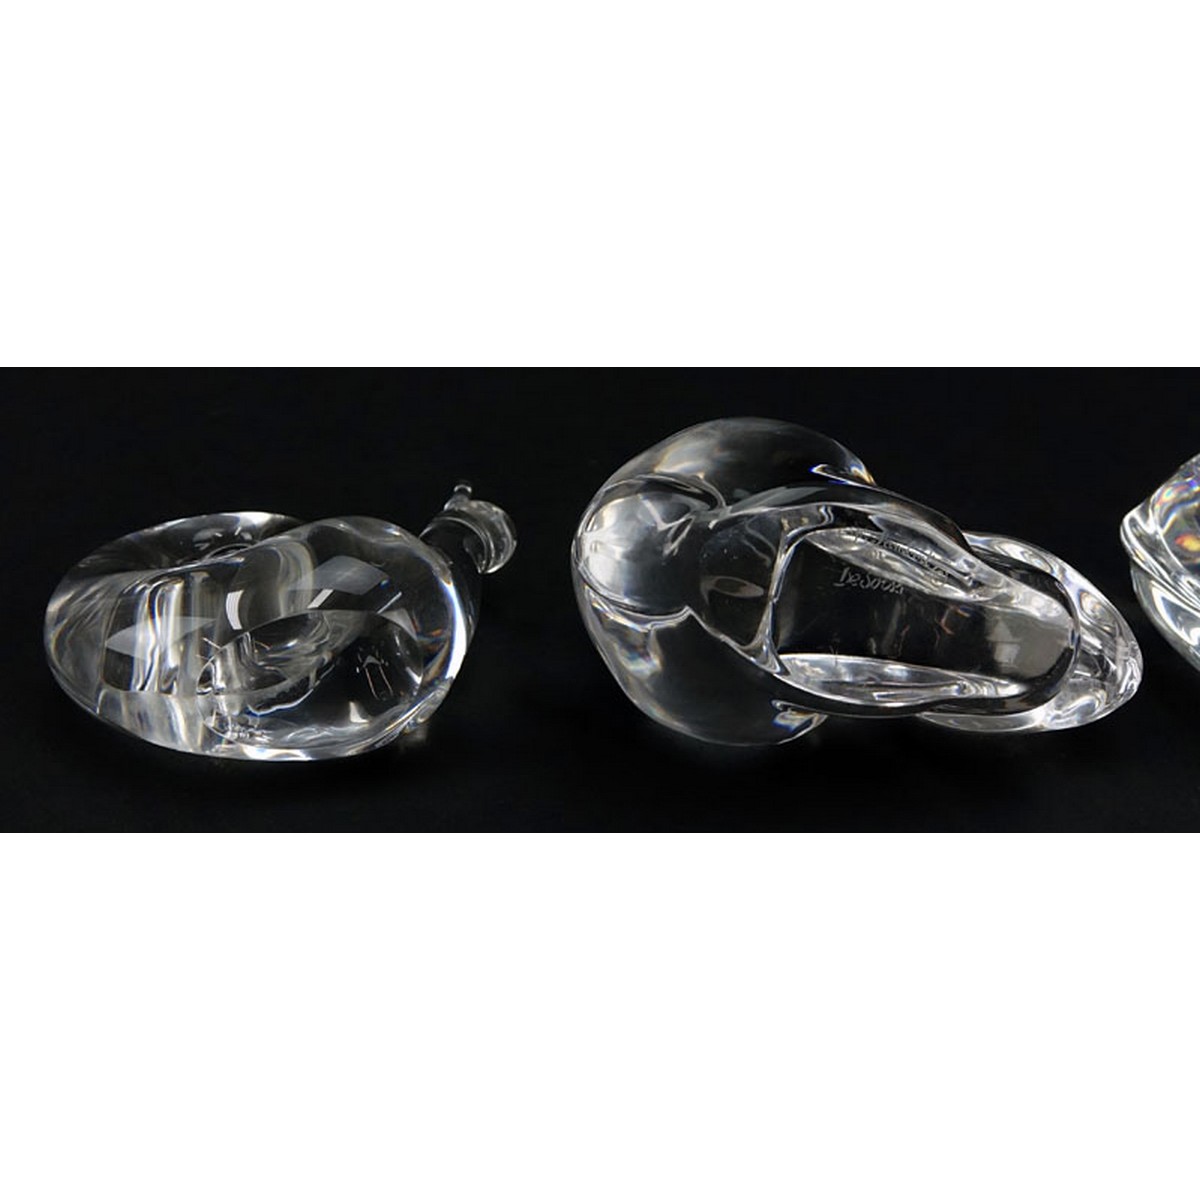 Grouping of Five (5) Paperweights: Baccarat Crystal Elephant, Baccarat Crystal Elephant with Trunk Up, Baccarat Crystal Whale, Steuben Crystal Snail, Val St. Lambert Crystal Rabbit.